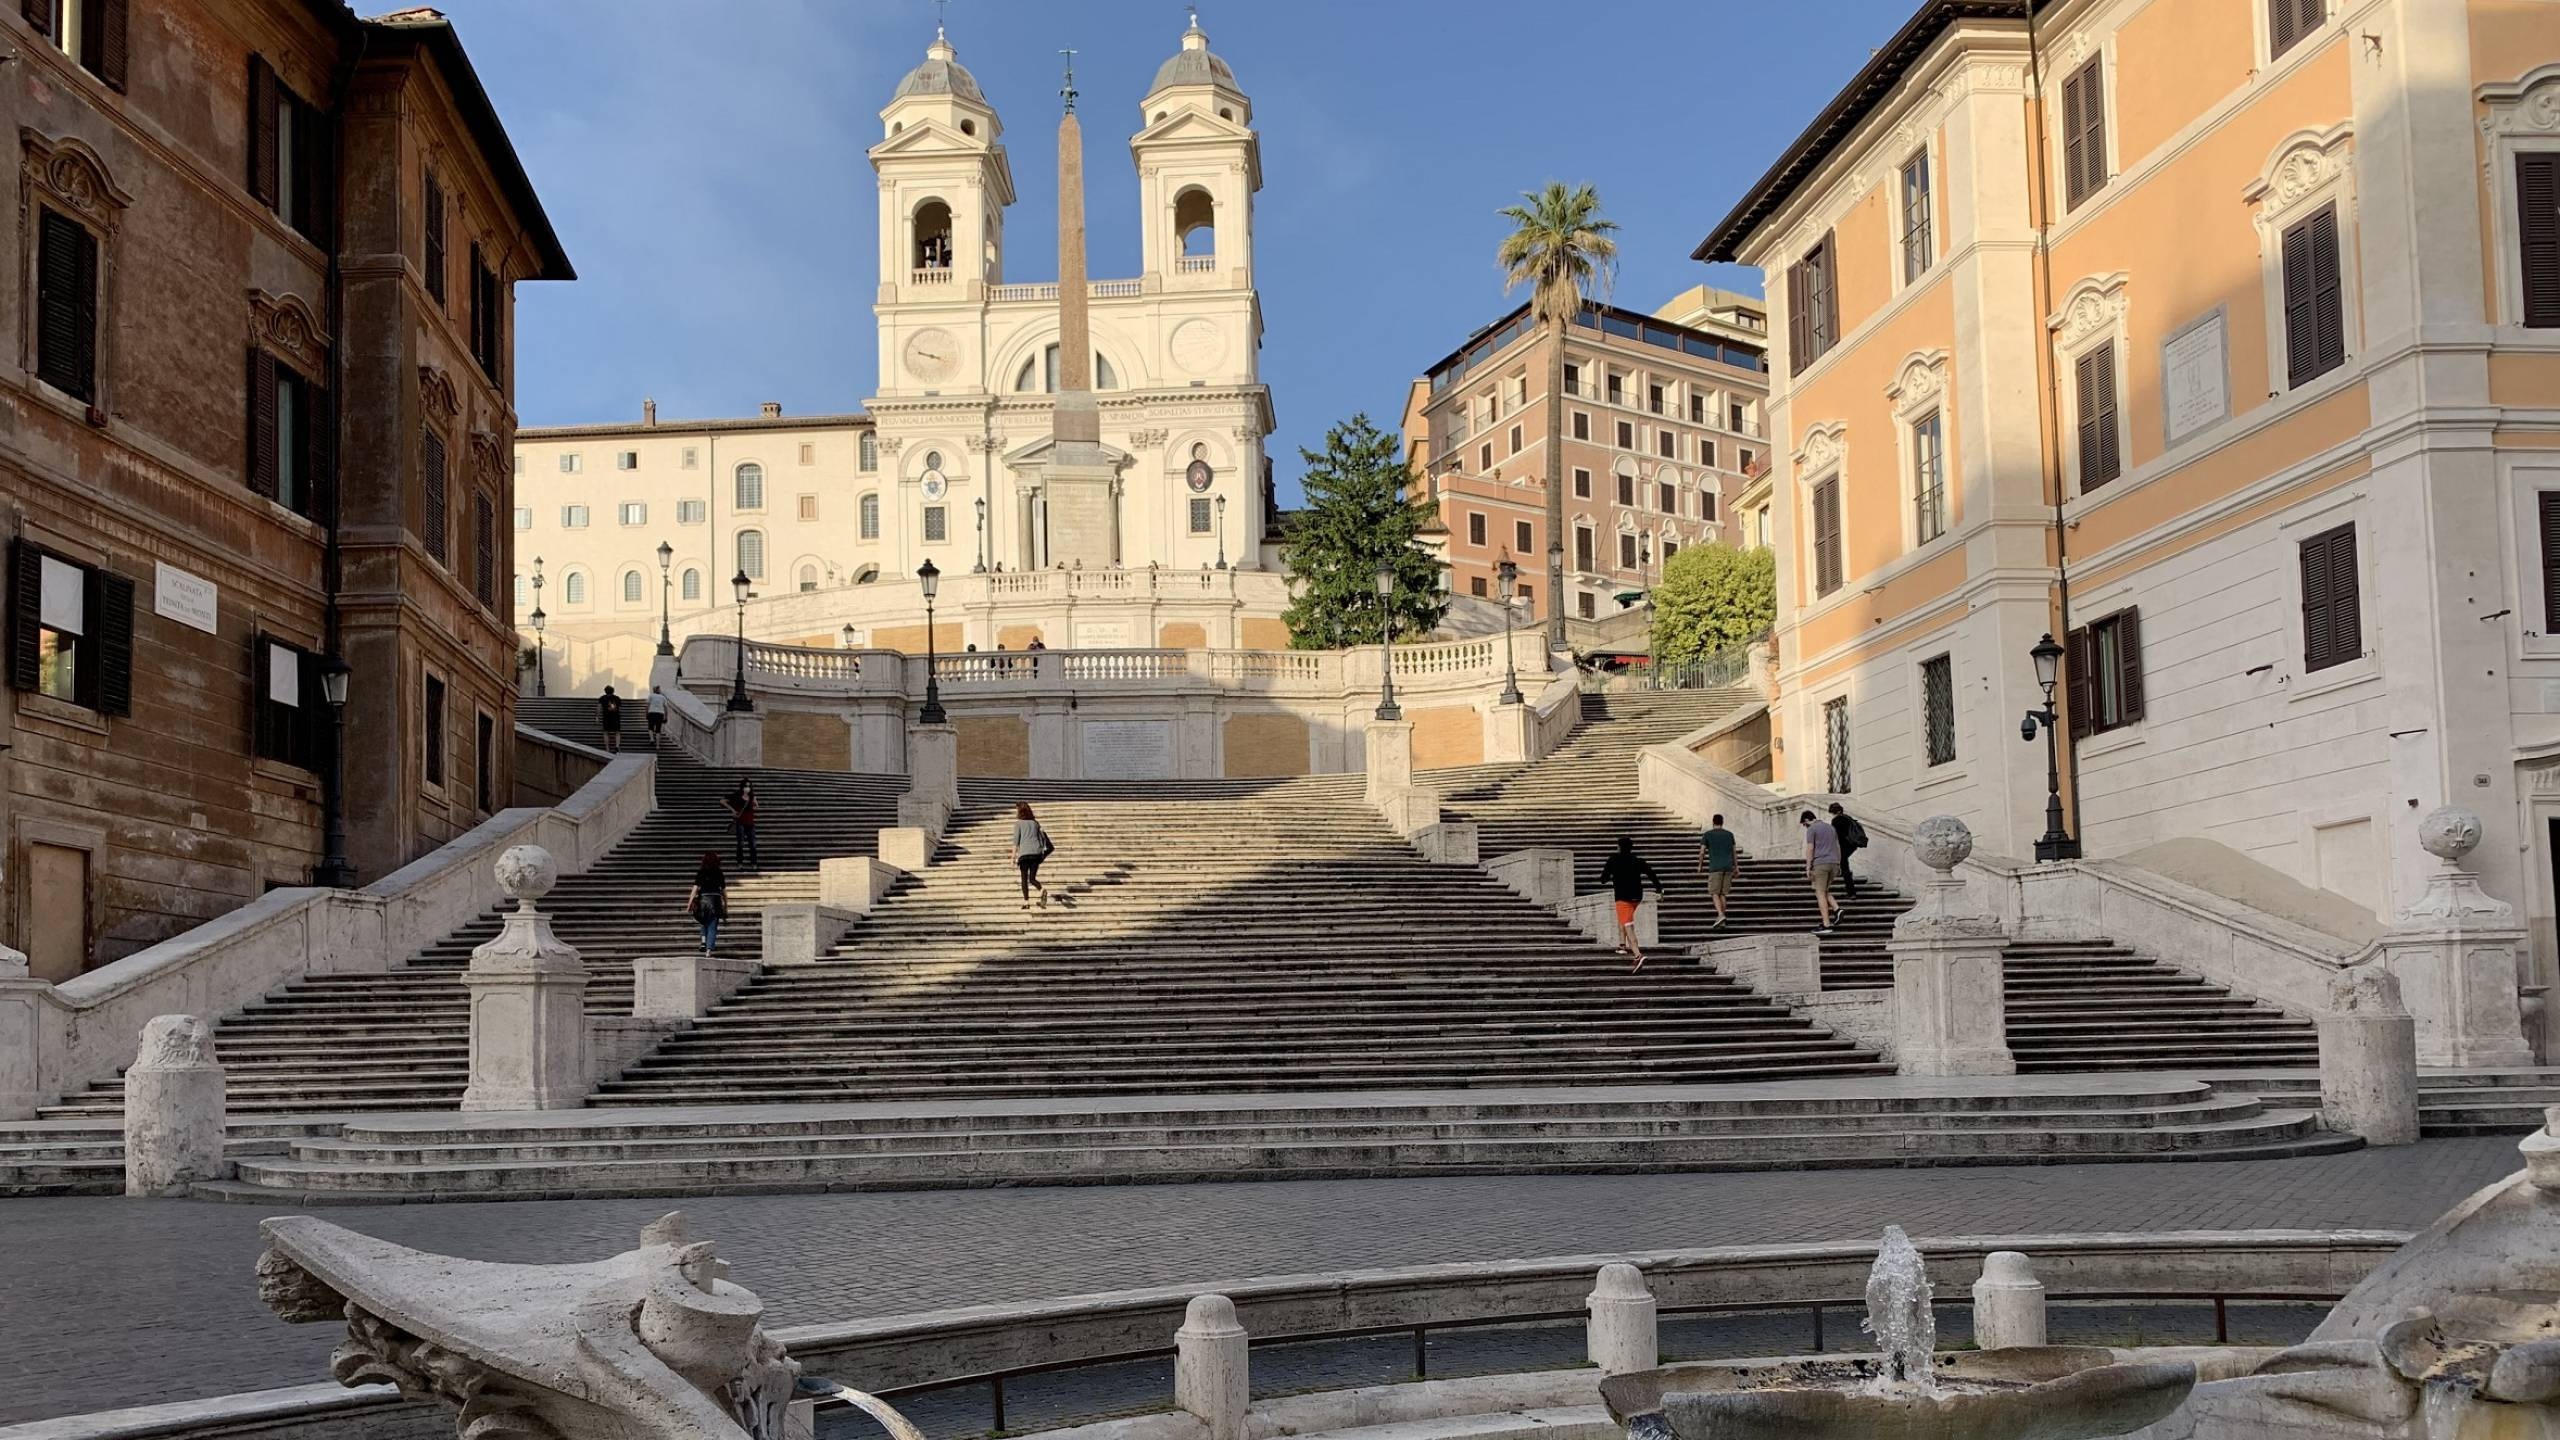 Spanish Steps, Relais Piazza del Popolo, Hotels in Rome, Luxury accommodation, 2560x1440 HD Desktop